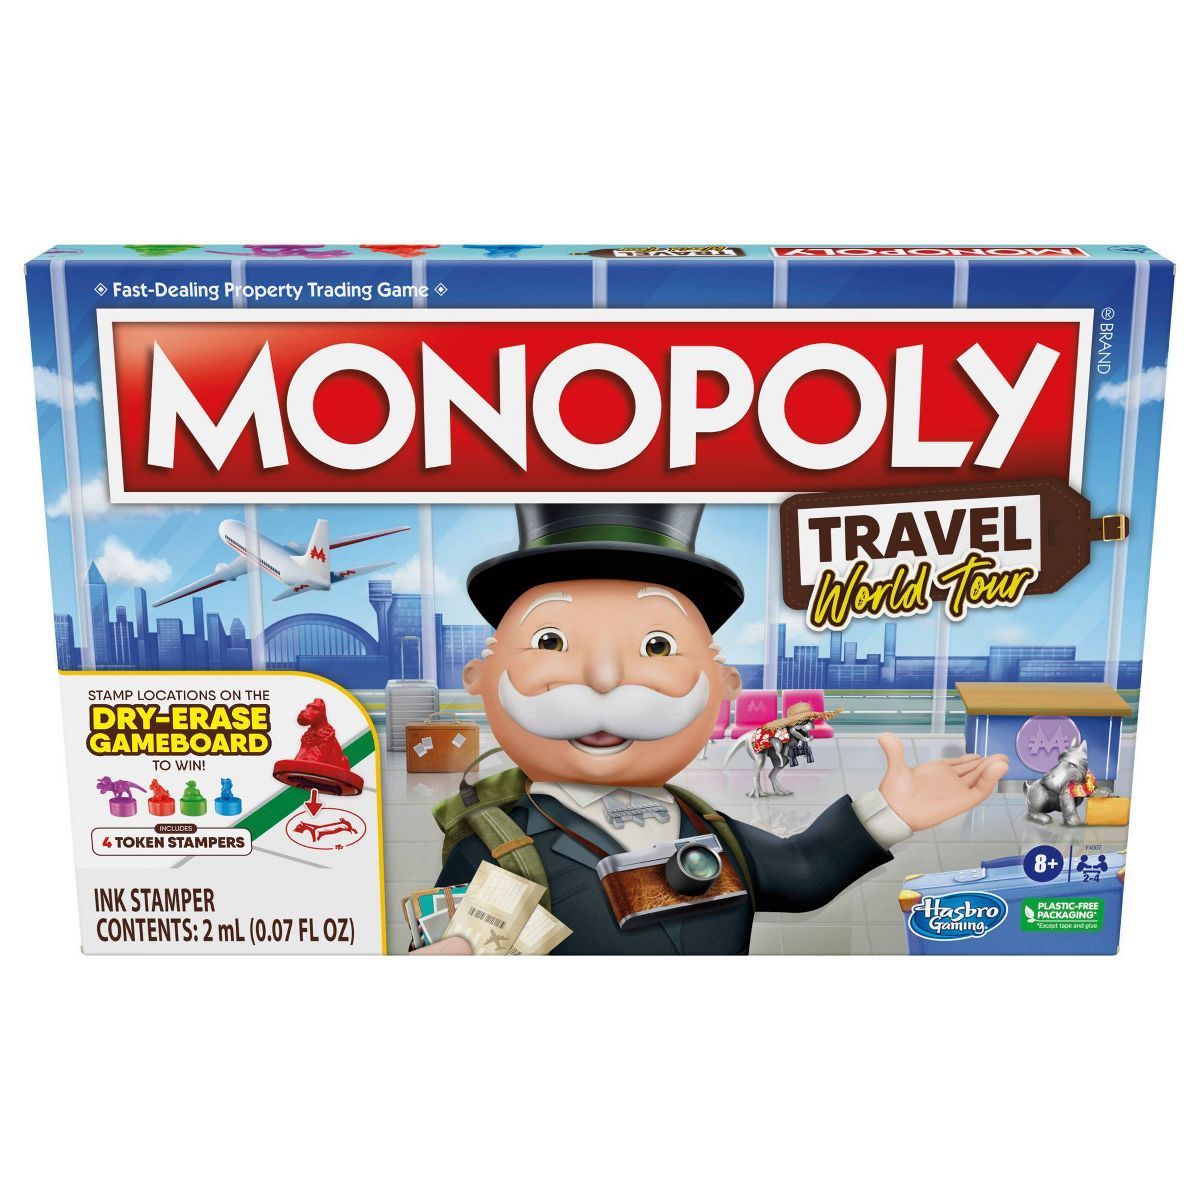 Monopoly Travel World Tour Monopoly Board Game | Target